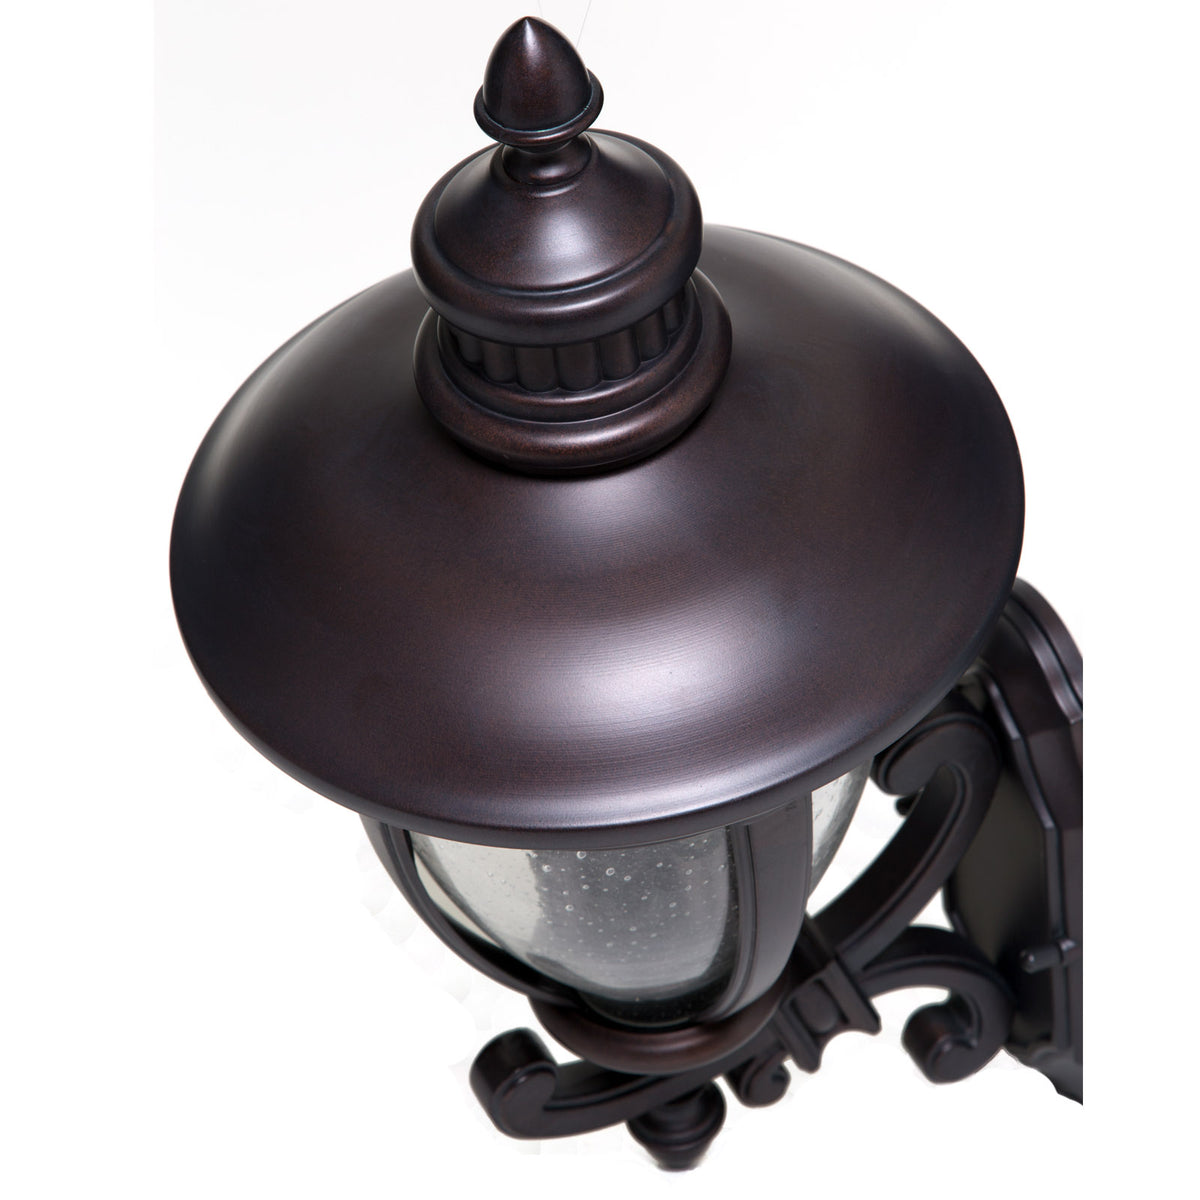 buy wall mount light fixtures at cheap rate in bulk. wholesale & retail lighting equipments store. home décor ideas, maintenance, repair replacement parts